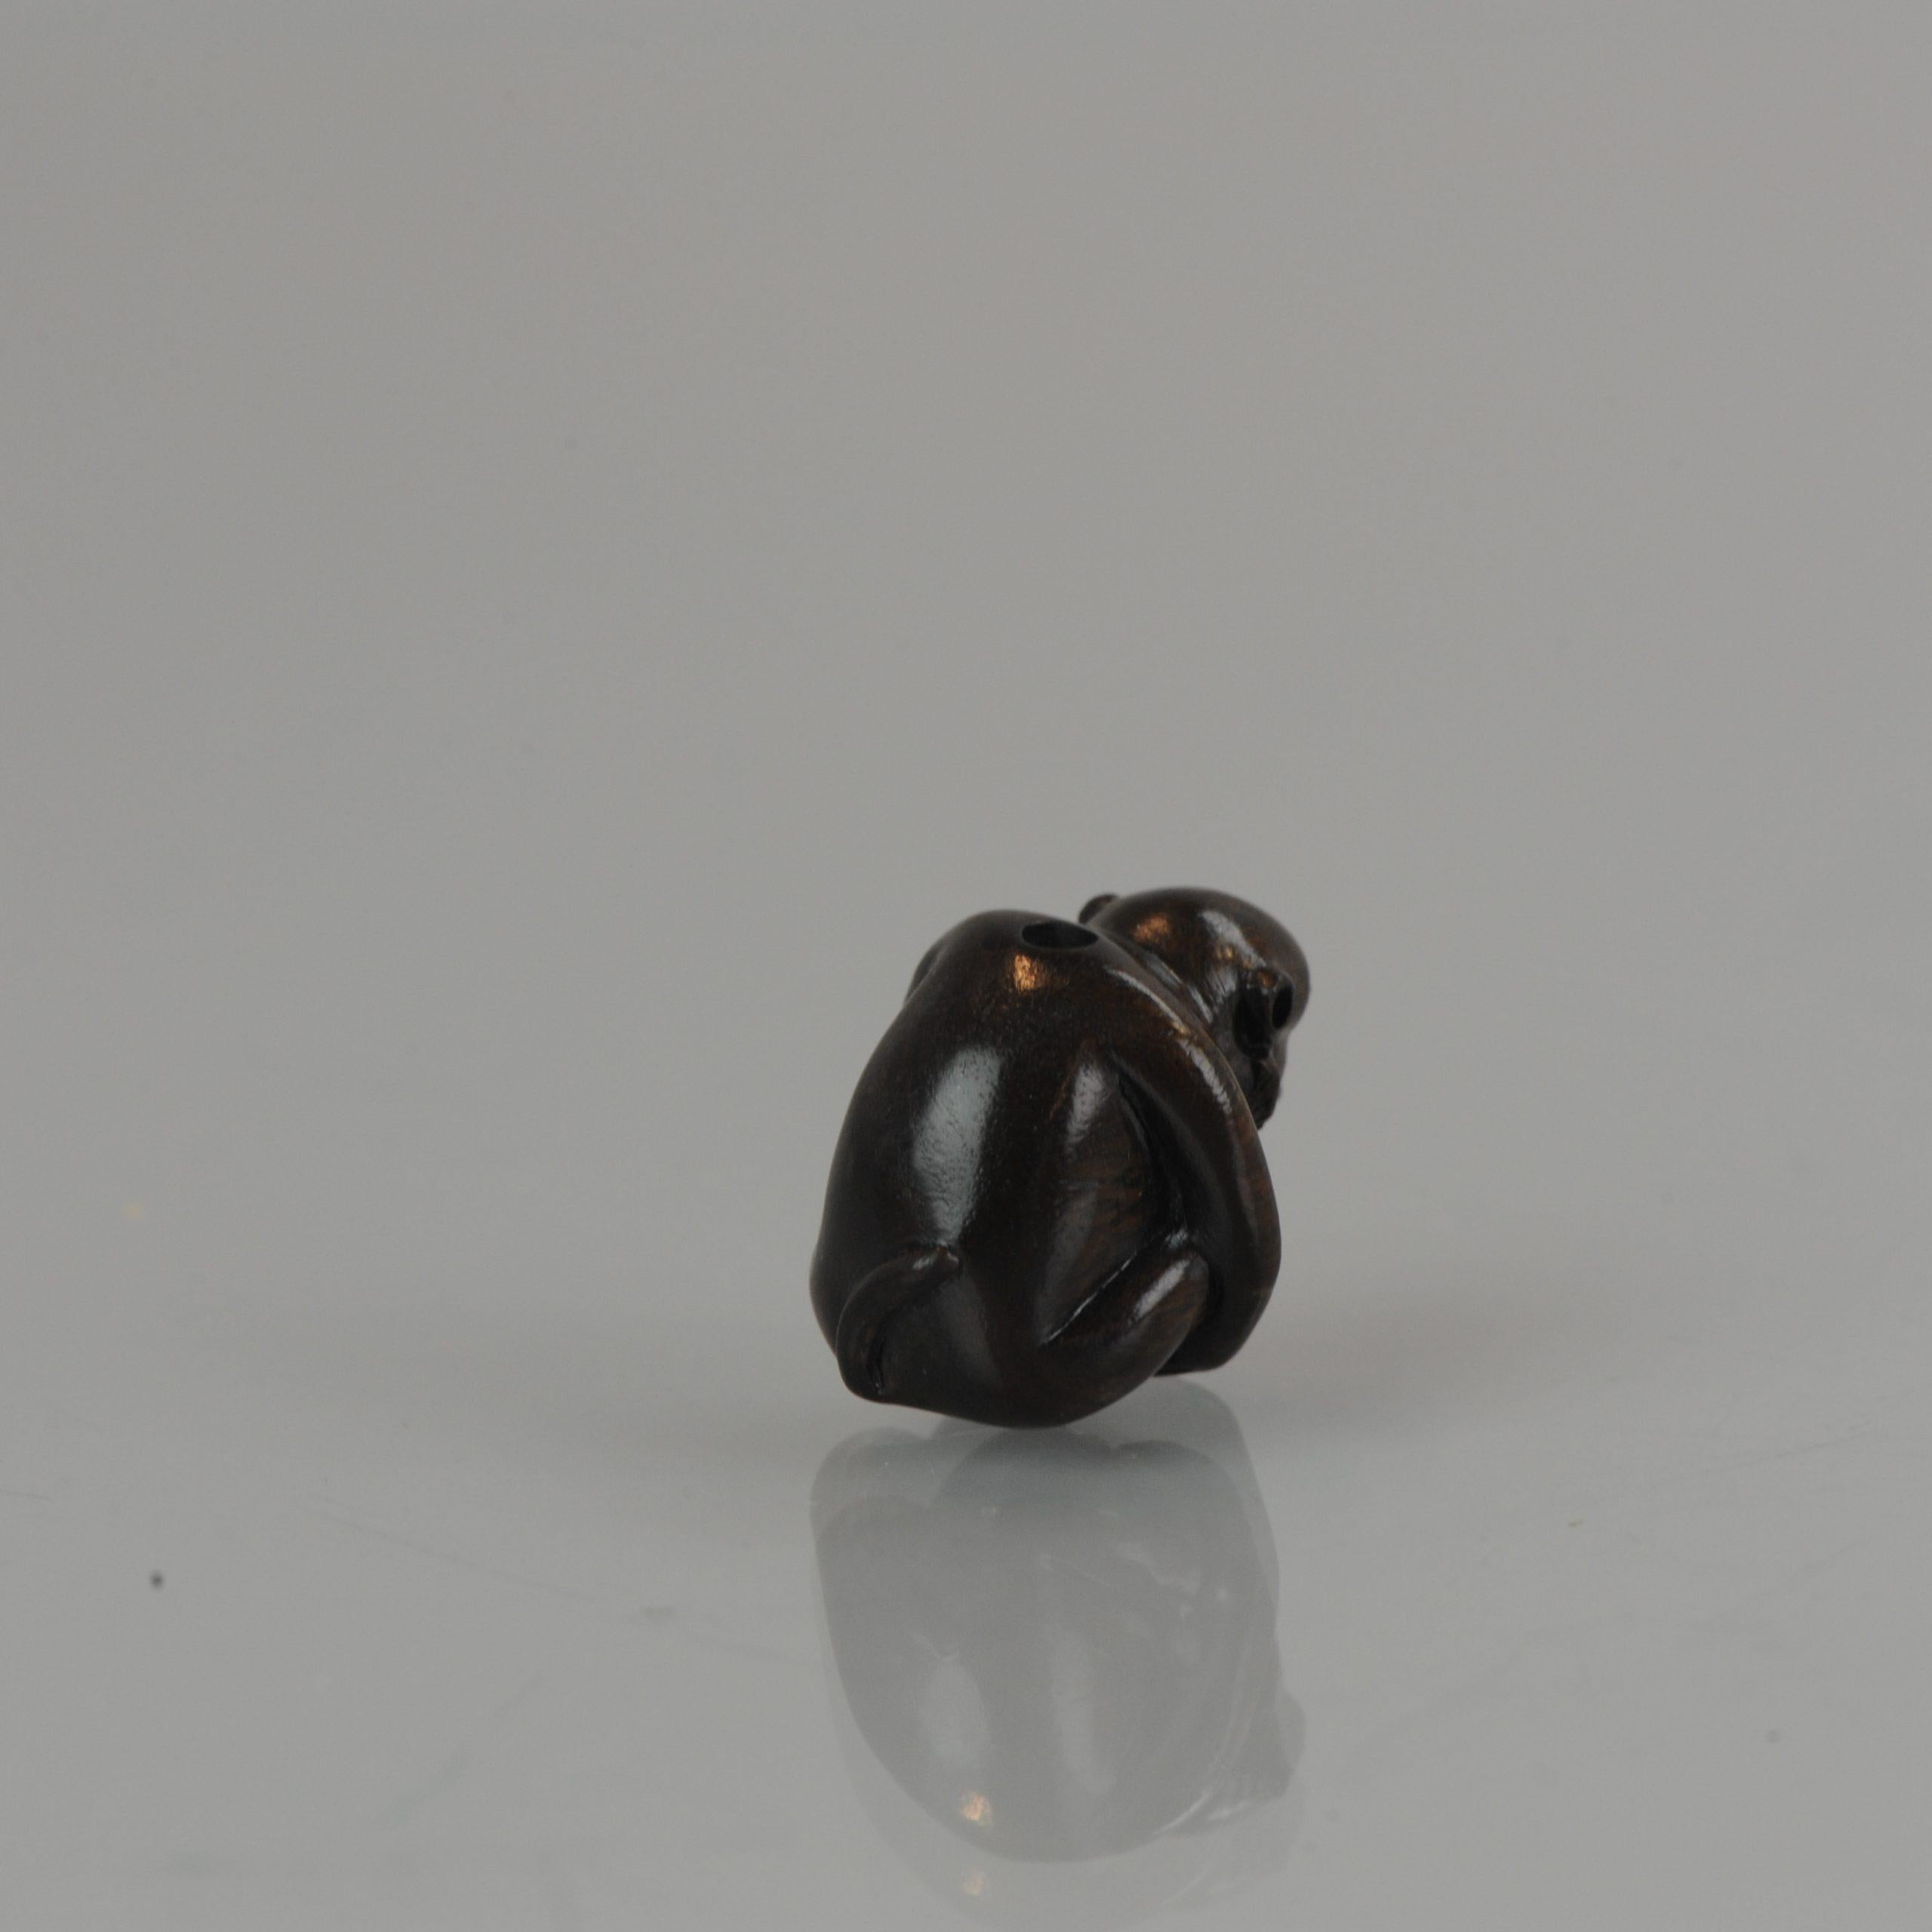 Antique Wood Monkey Netsuke 19th-20th Century Japanese Masakazu, Japan In Excellent Condition For Sale In Amsterdam, Noord Holland